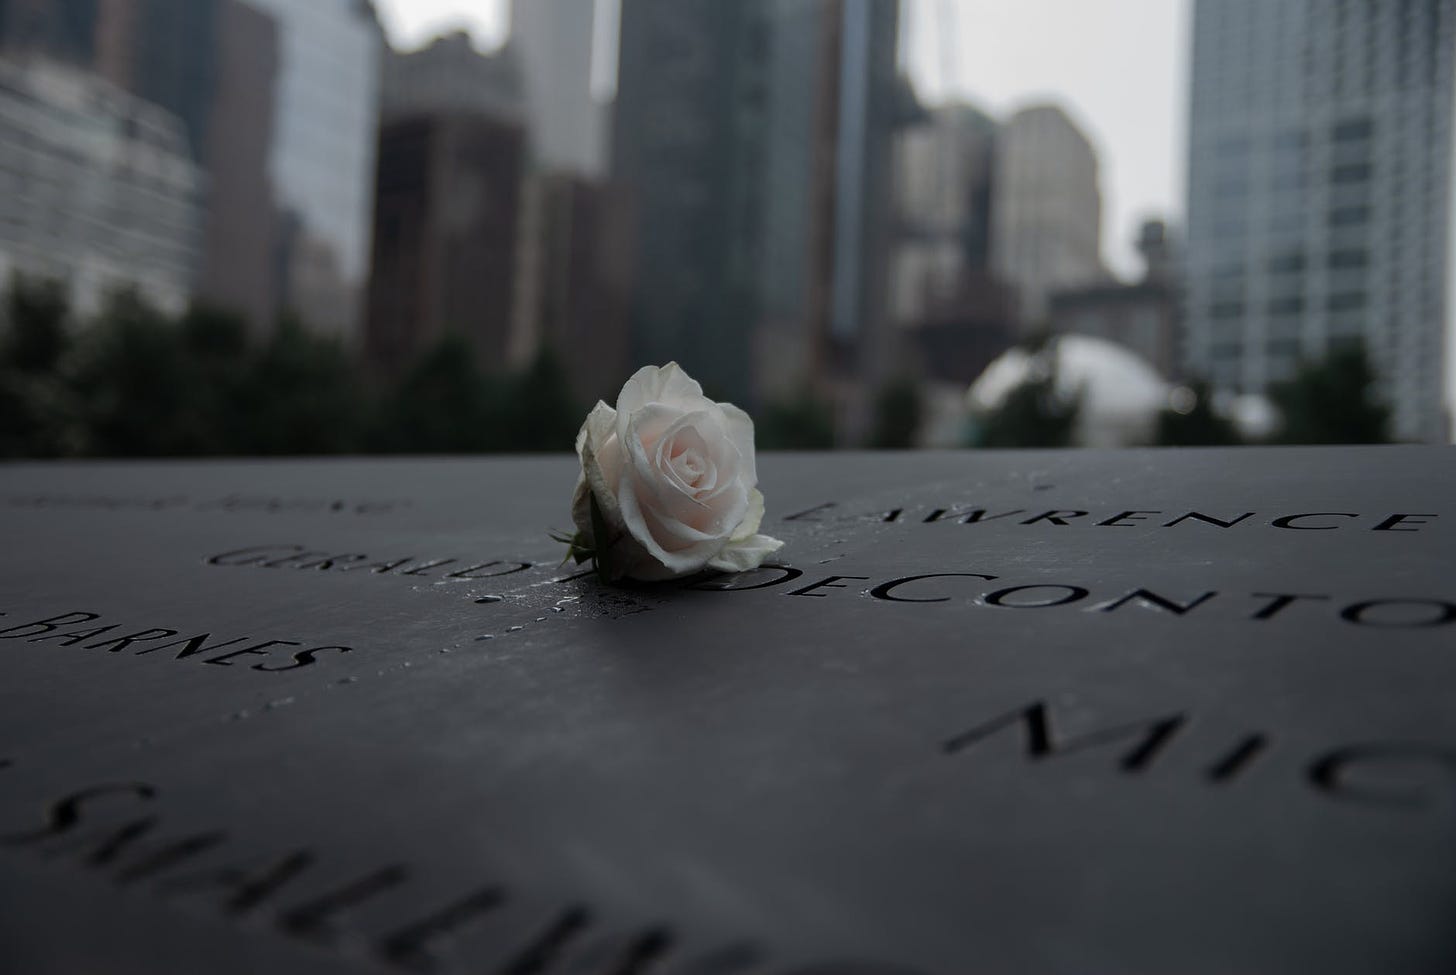 Pale pink rose resting on 911 memorial with skyscrapers of NYC in background